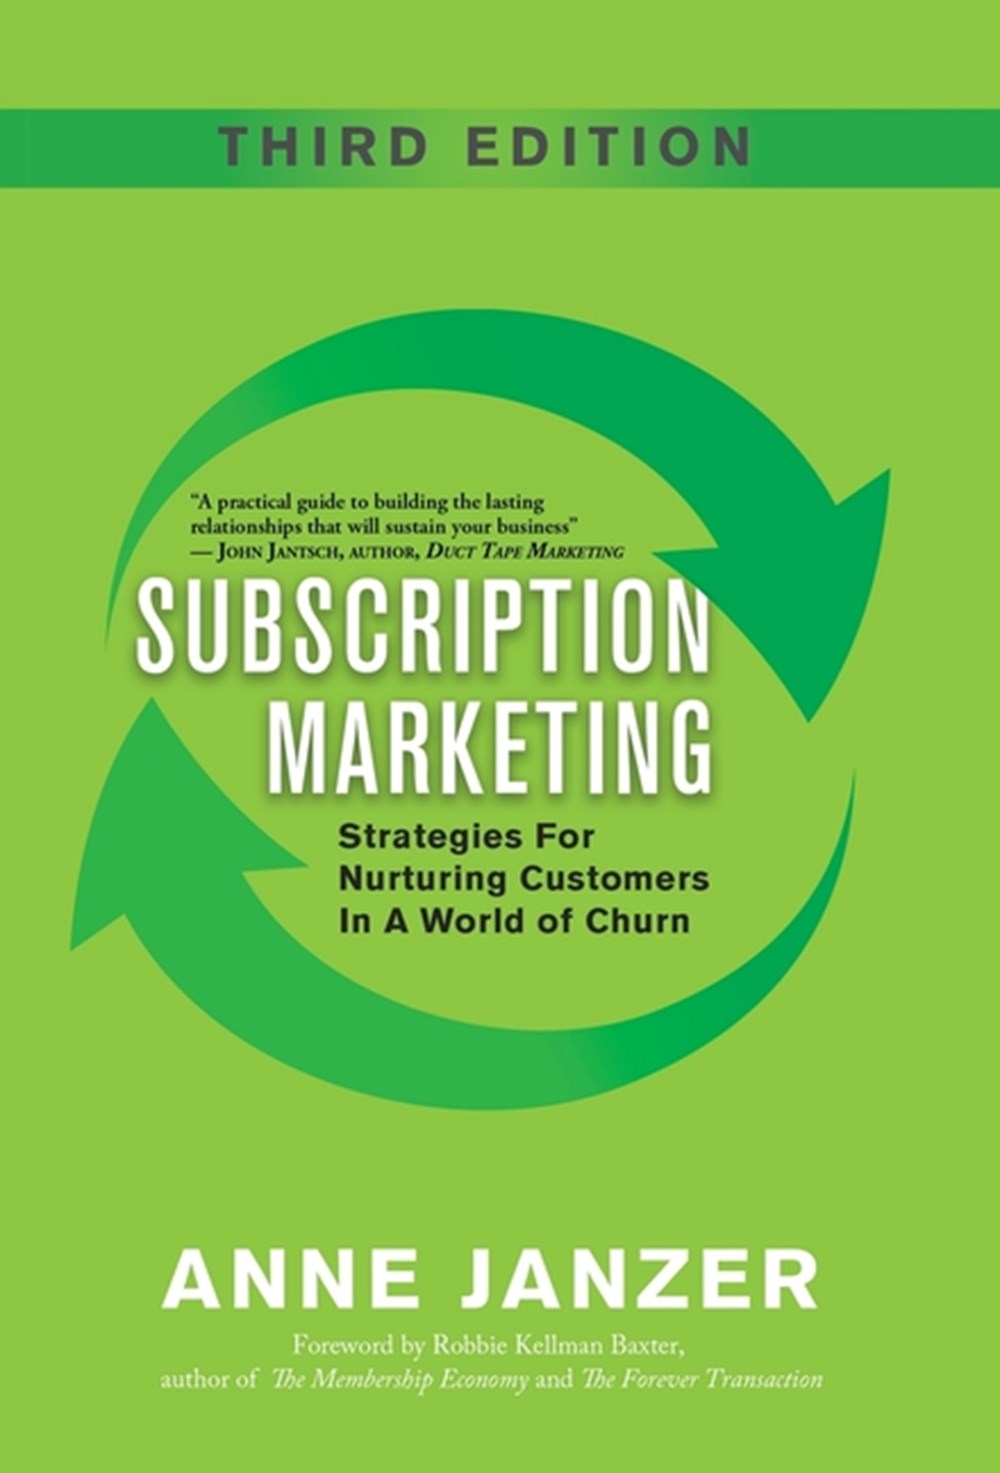 Subscription Marketing Strategies for Nurturing Customers in a World of Churn